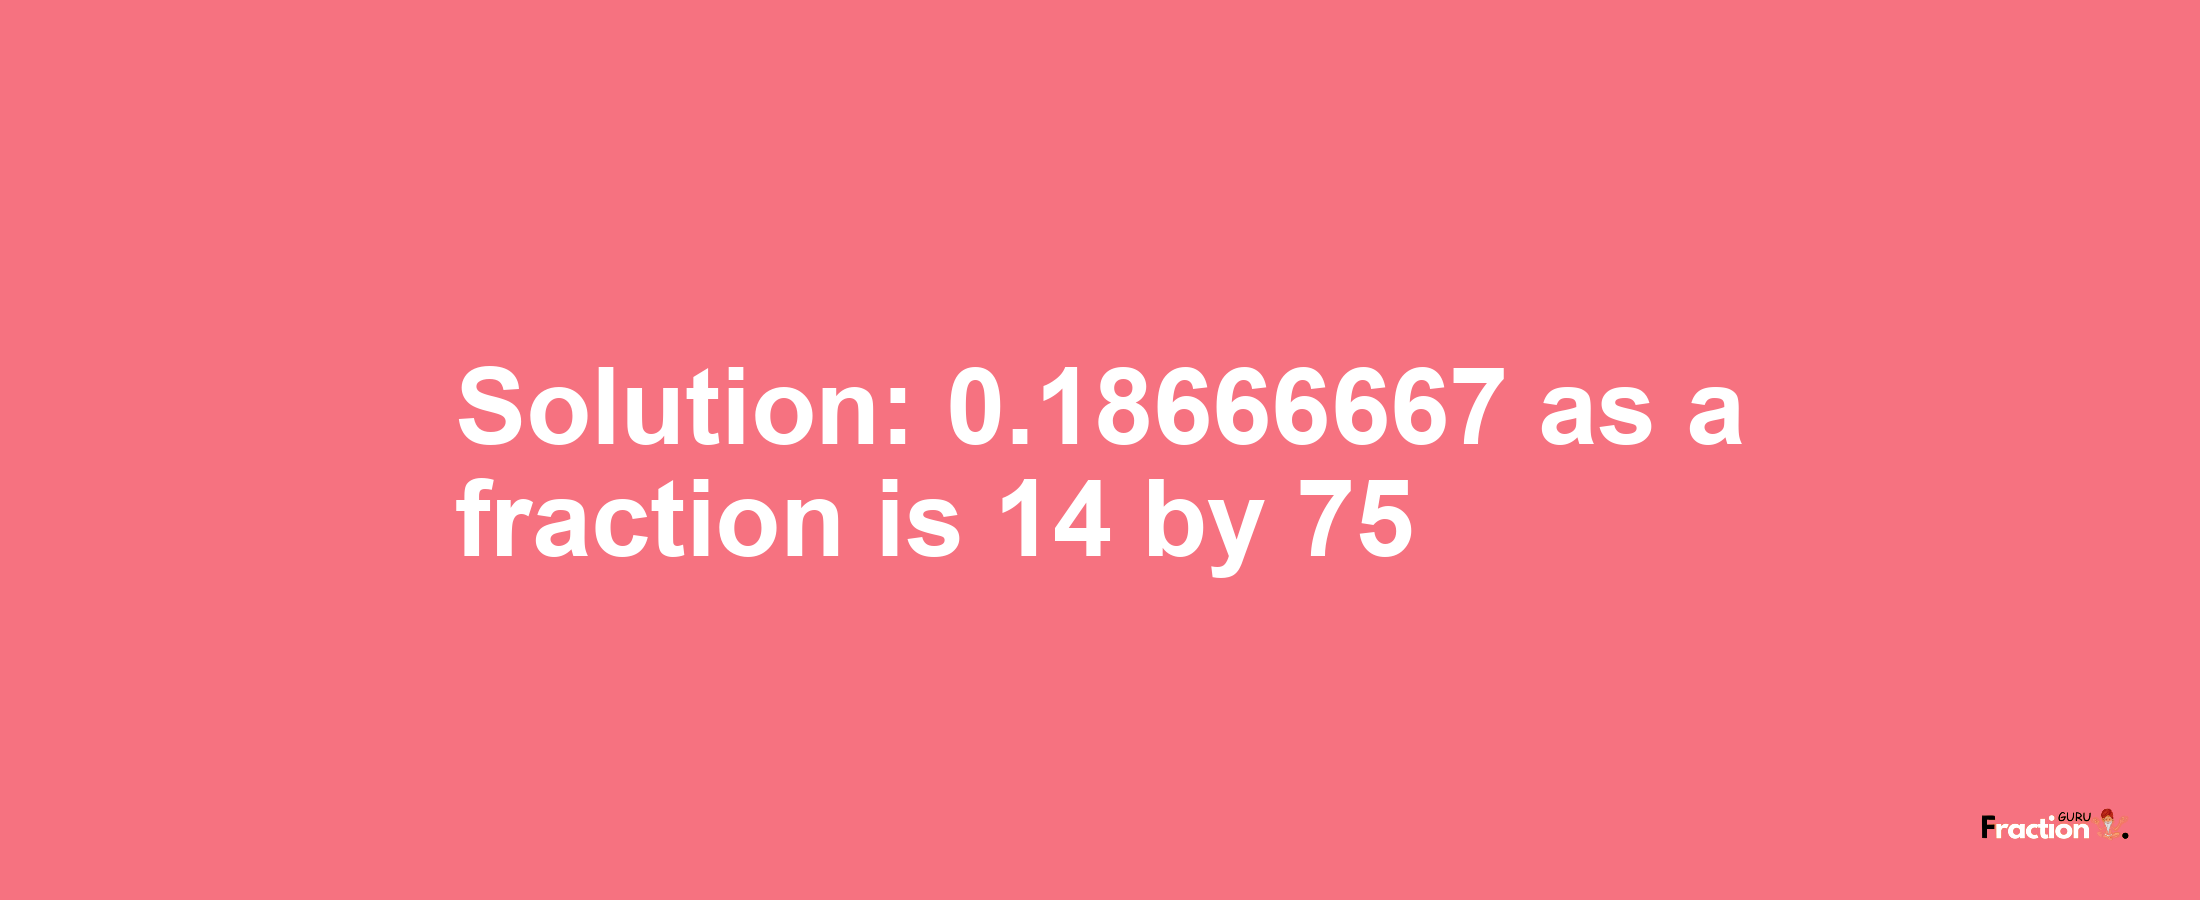 Solution:0.18666667 as a fraction is 14/75